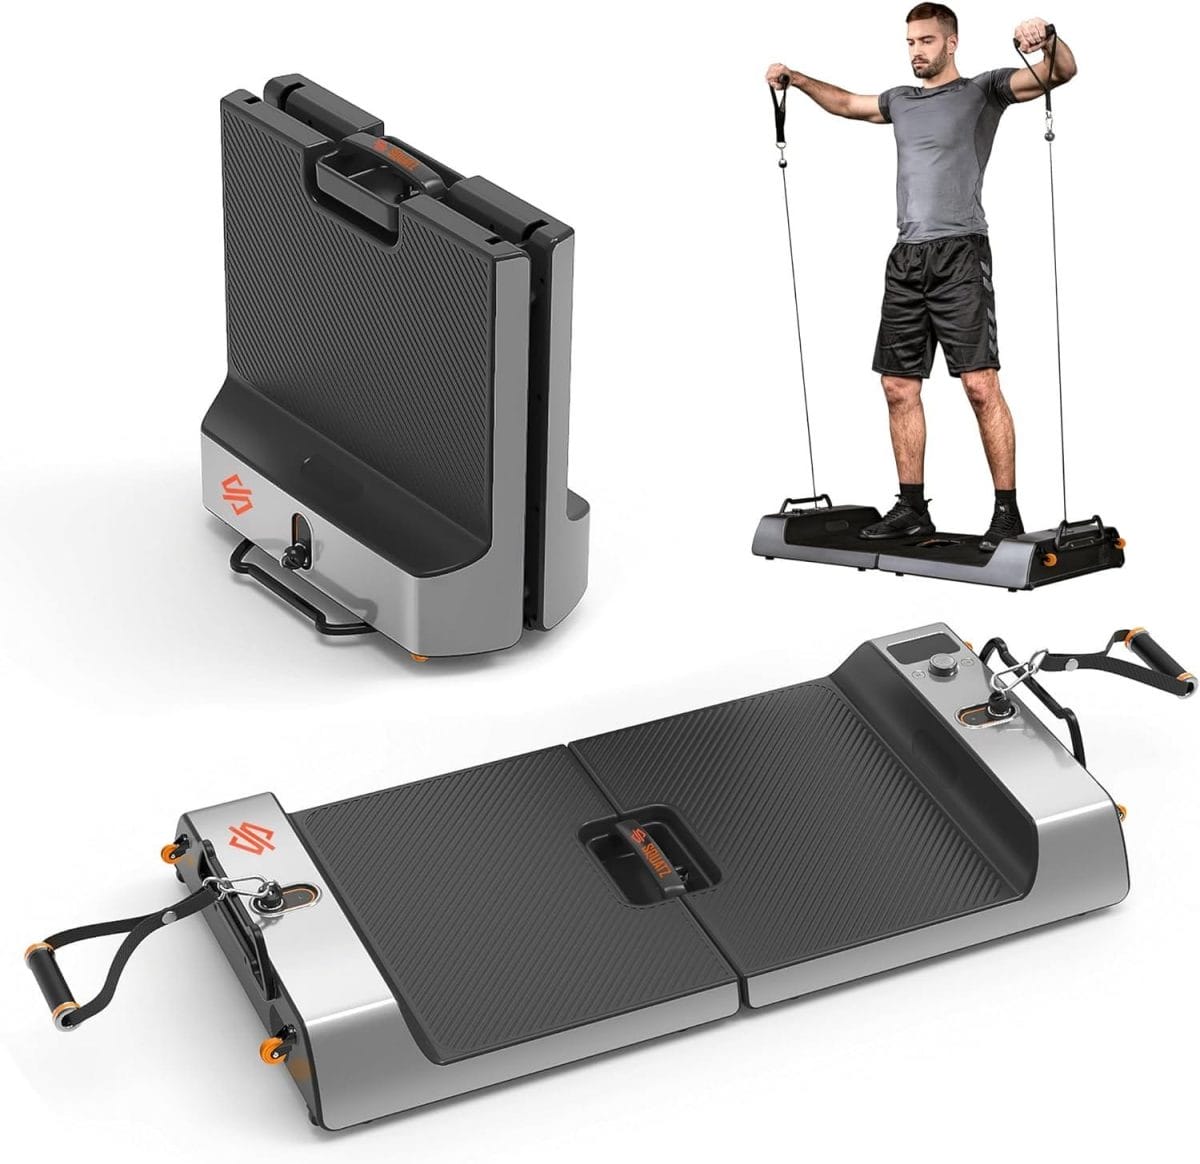 SQUATZ Apollo Board Smart Home Gym 265 LBS Resistance, Multifunctional All in One Gym, Cable Weight Machine with 3 Training Modes, Fitness Workout Equipment